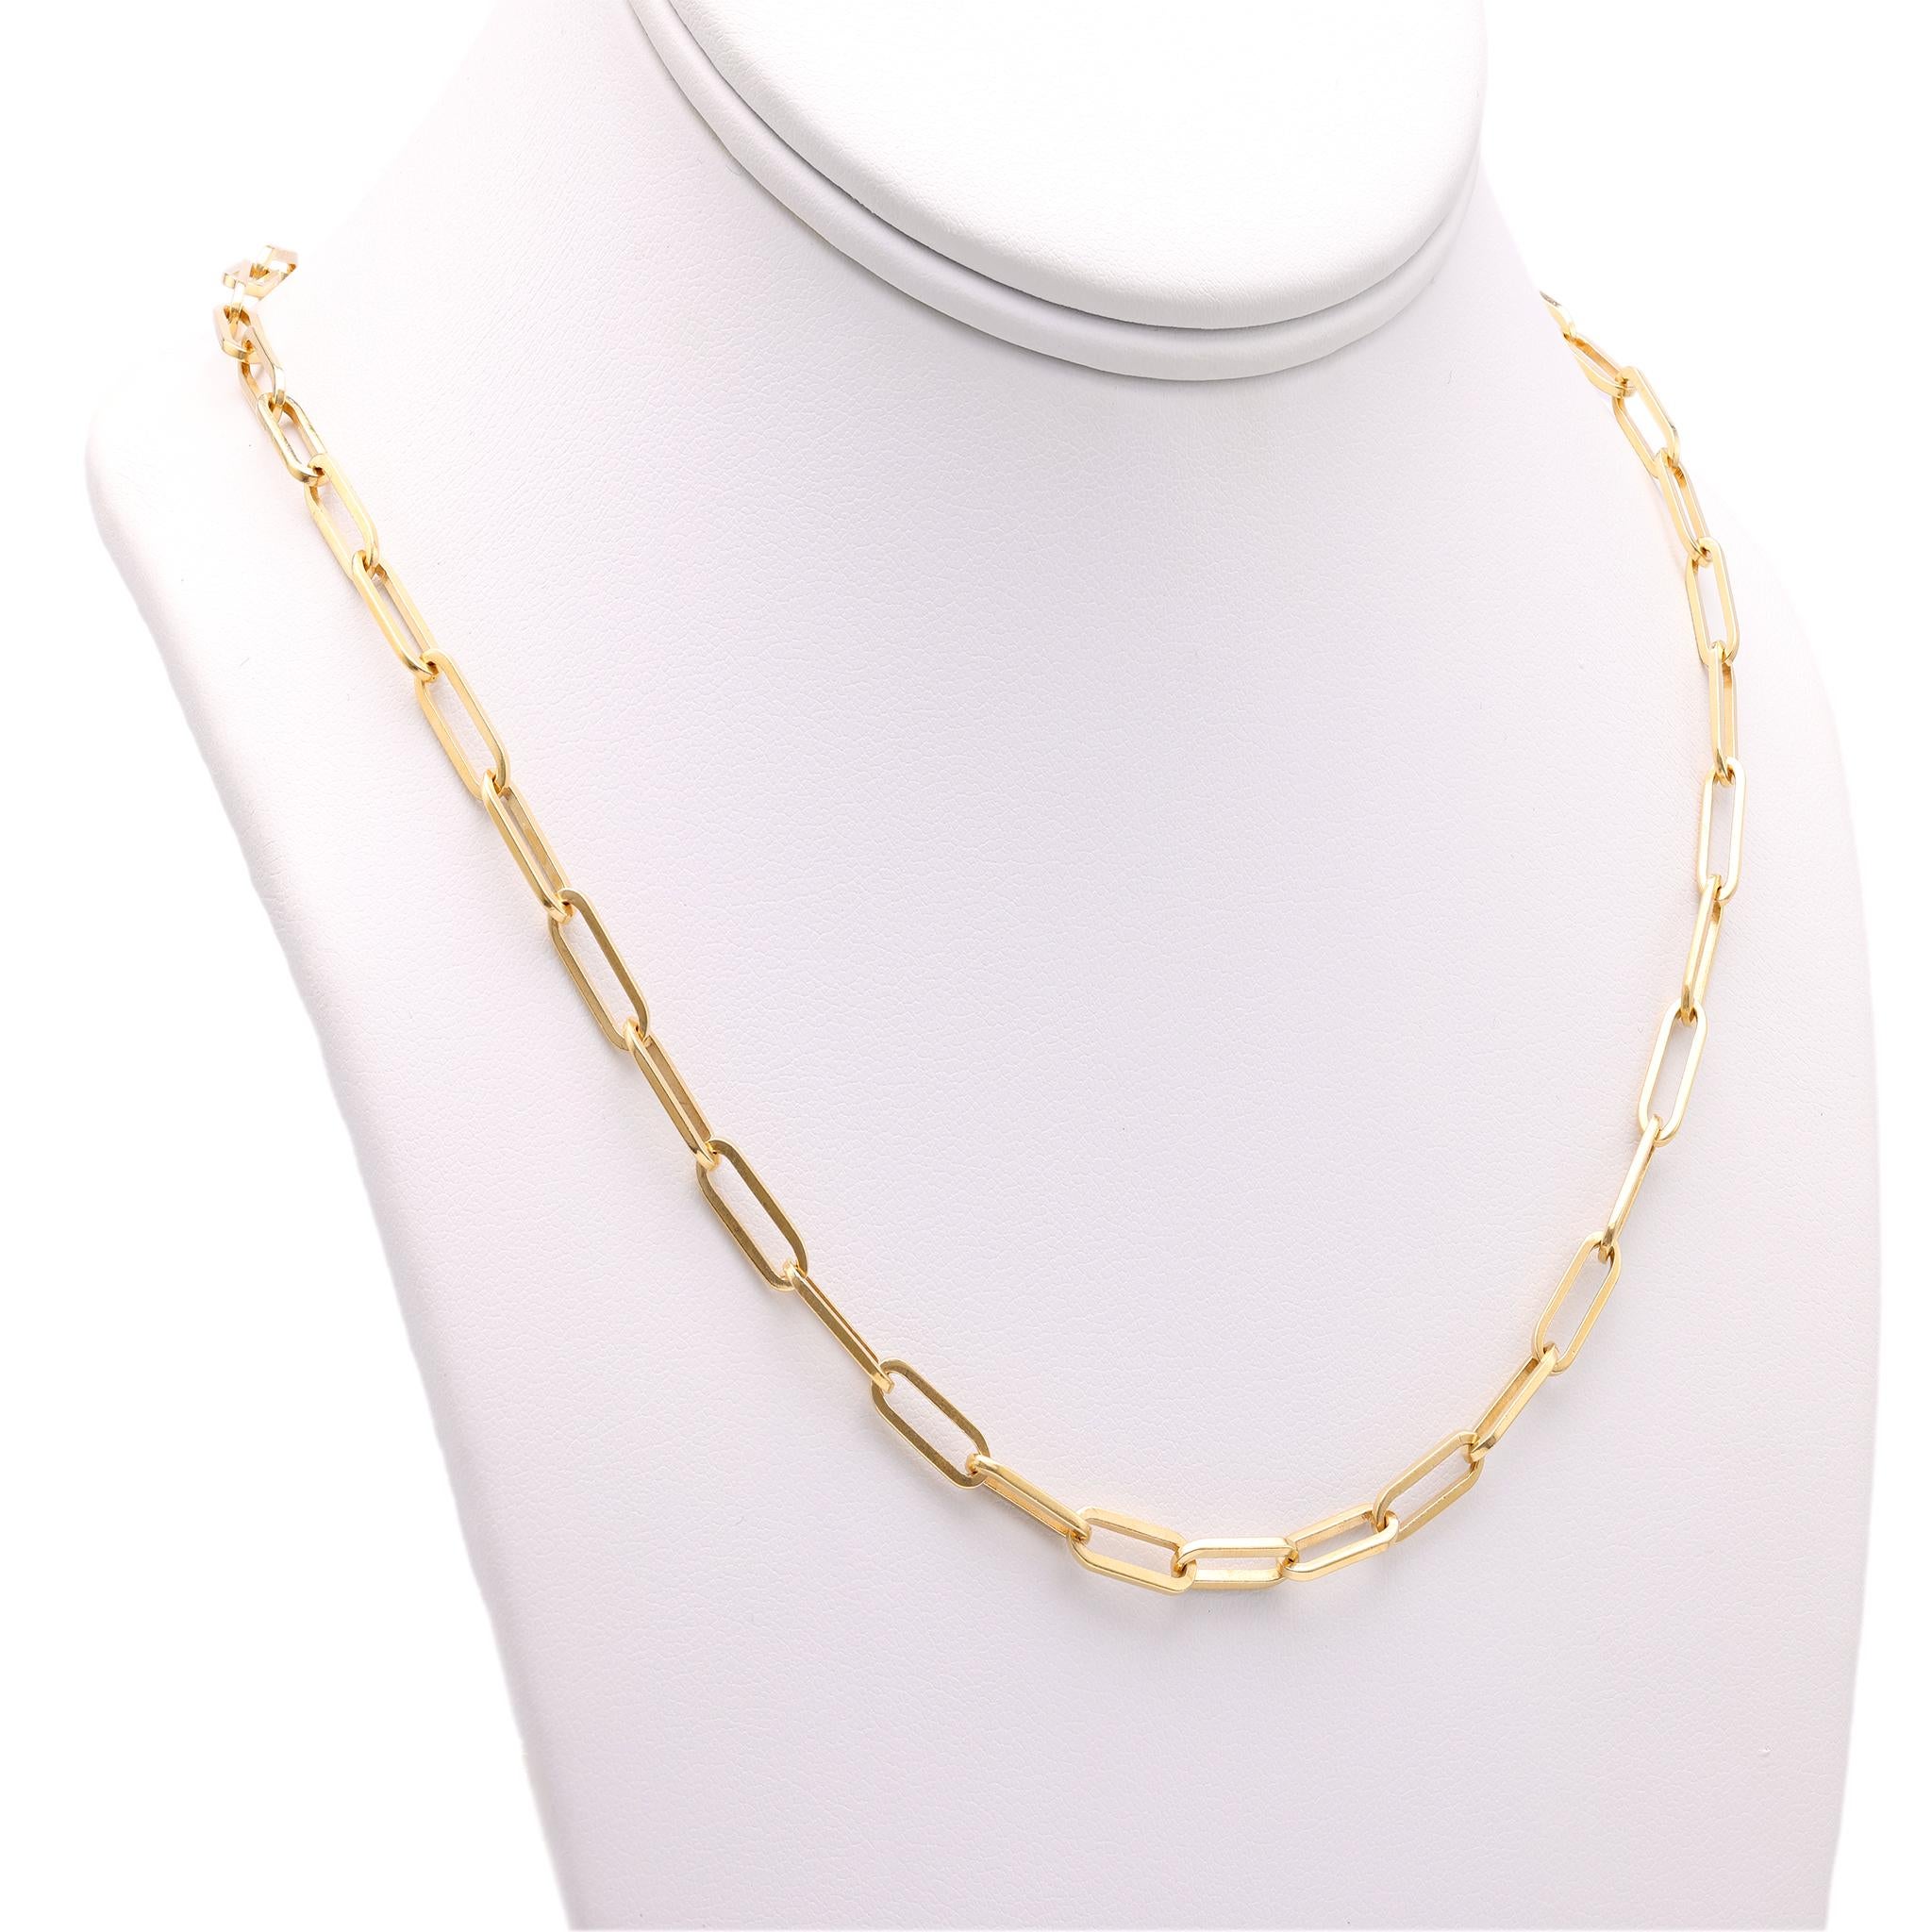 Women's or Men's Vintage French Dinh Van 18k Yellow Gold Paperclip Necklace